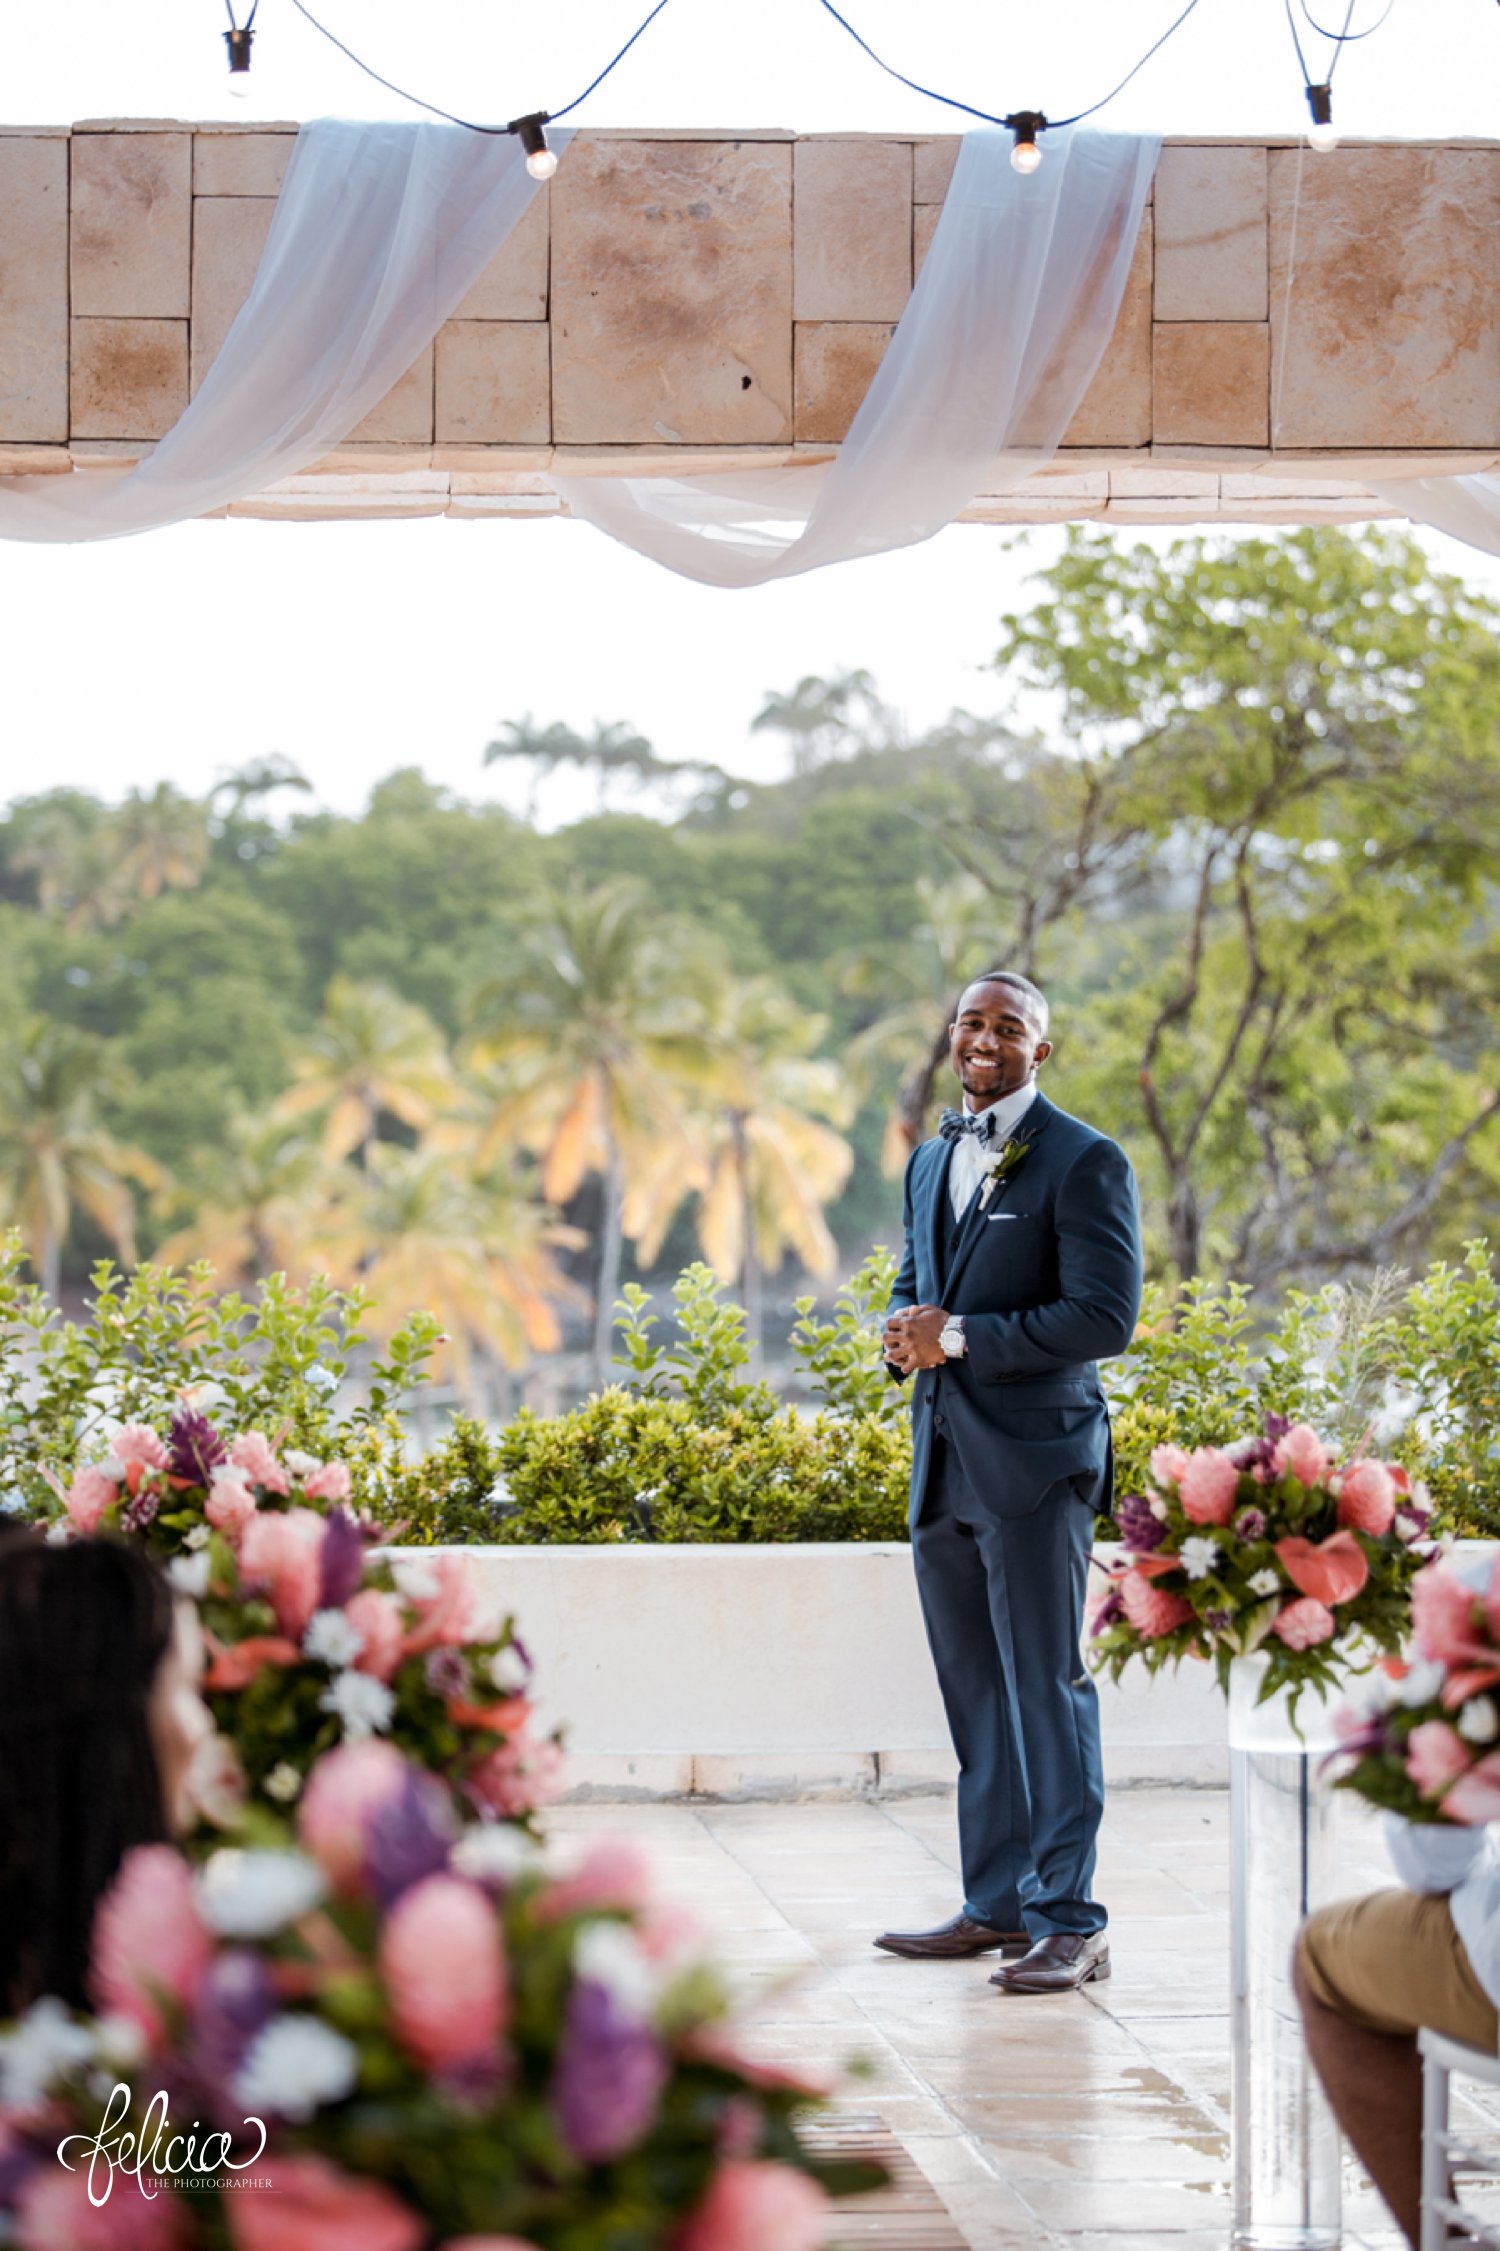   images by feliciathephotographer.com | destination wedding photographer | st lucia | l&s travel | the Royalton | ceremony | groom waiting at the end of the aisle | navy suit | paid bow tie | tropical | over look | 